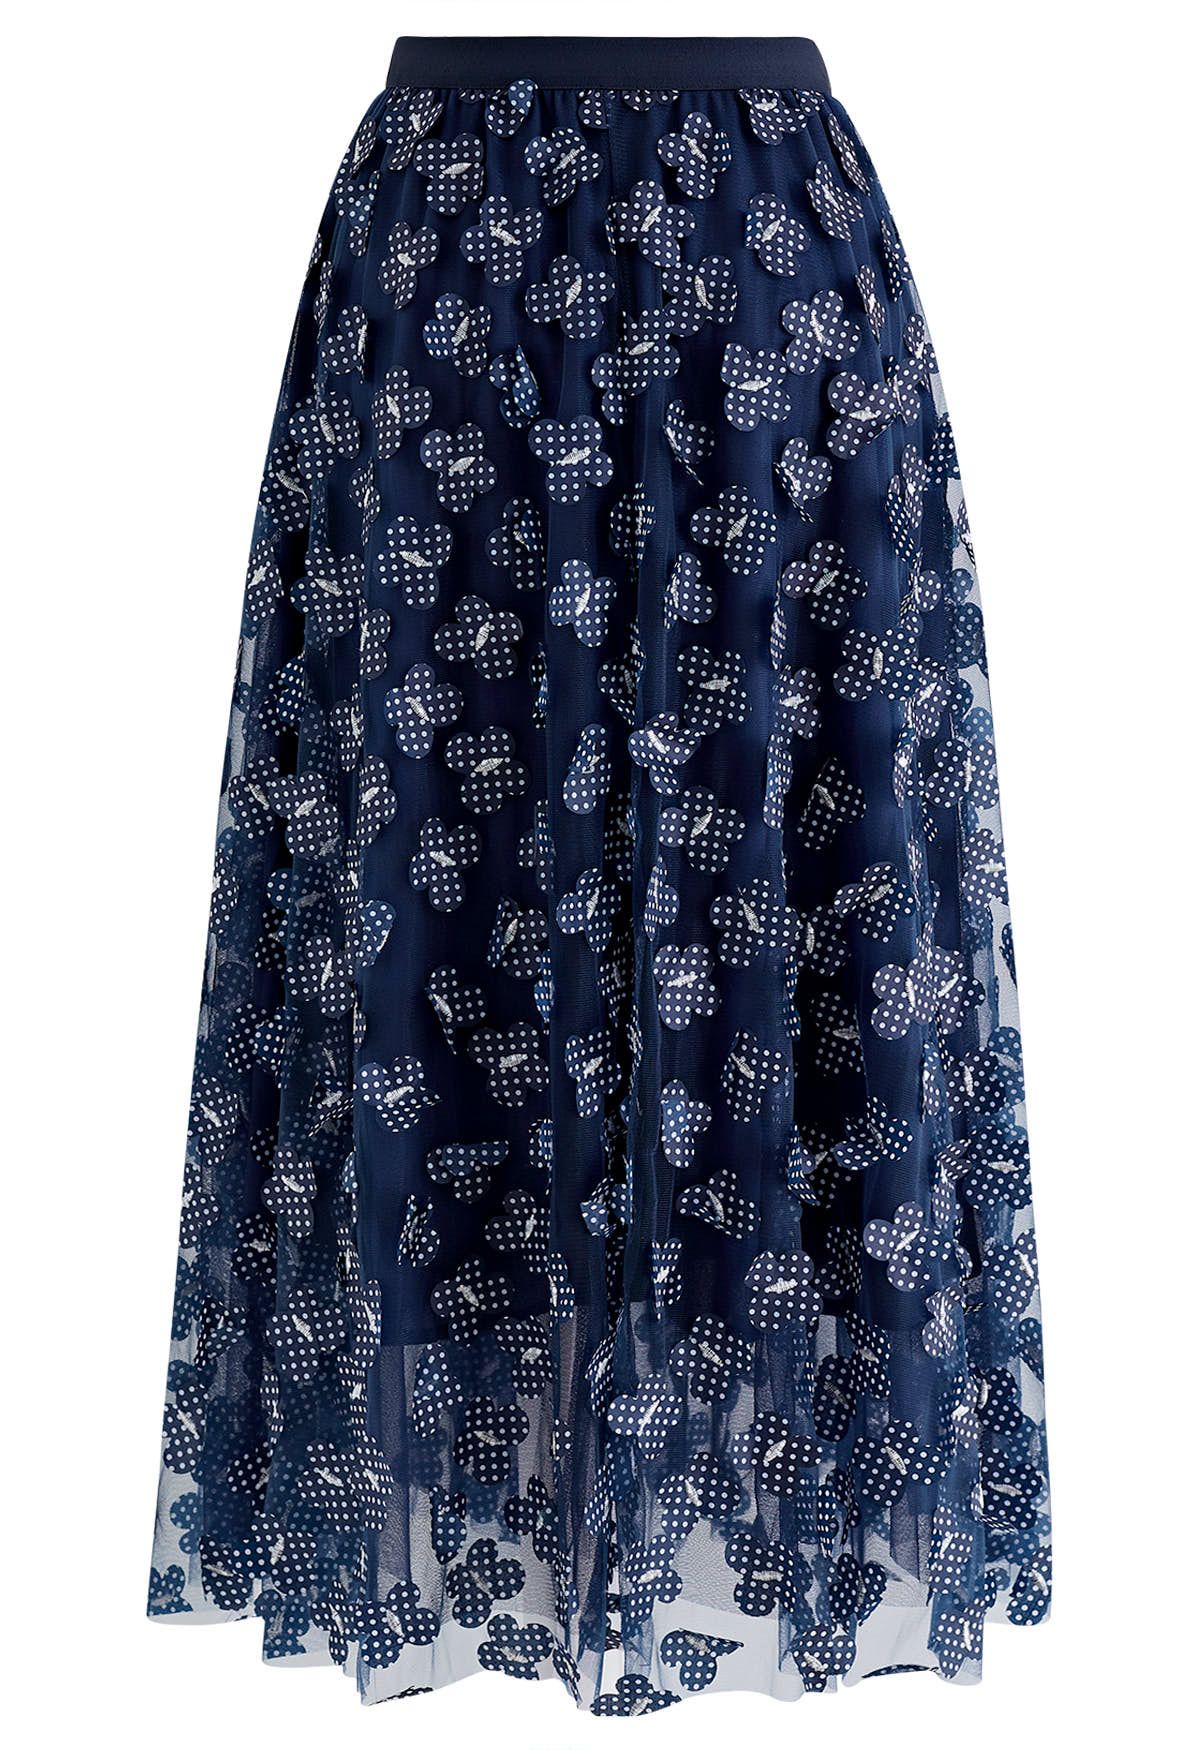 3D Dotted Butterfly Double-Layered Mesh Skirt in Navy